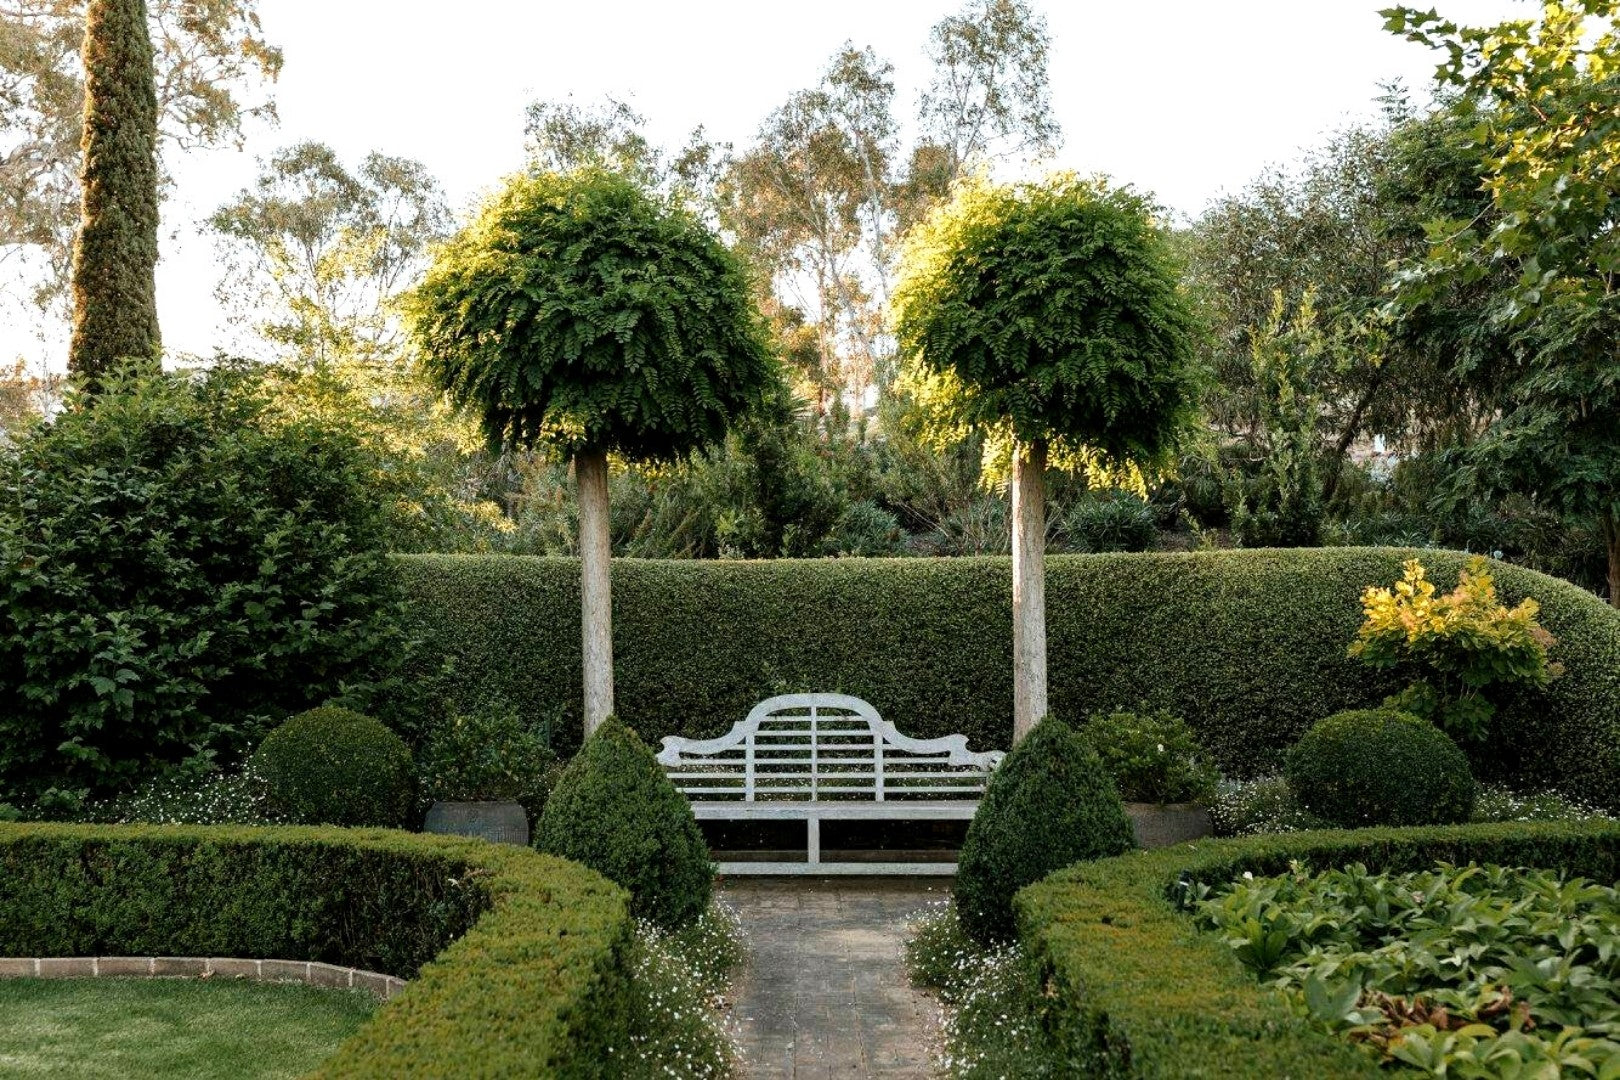 a white bench nestled in-between two fern trees, surrounded by a European-style garden